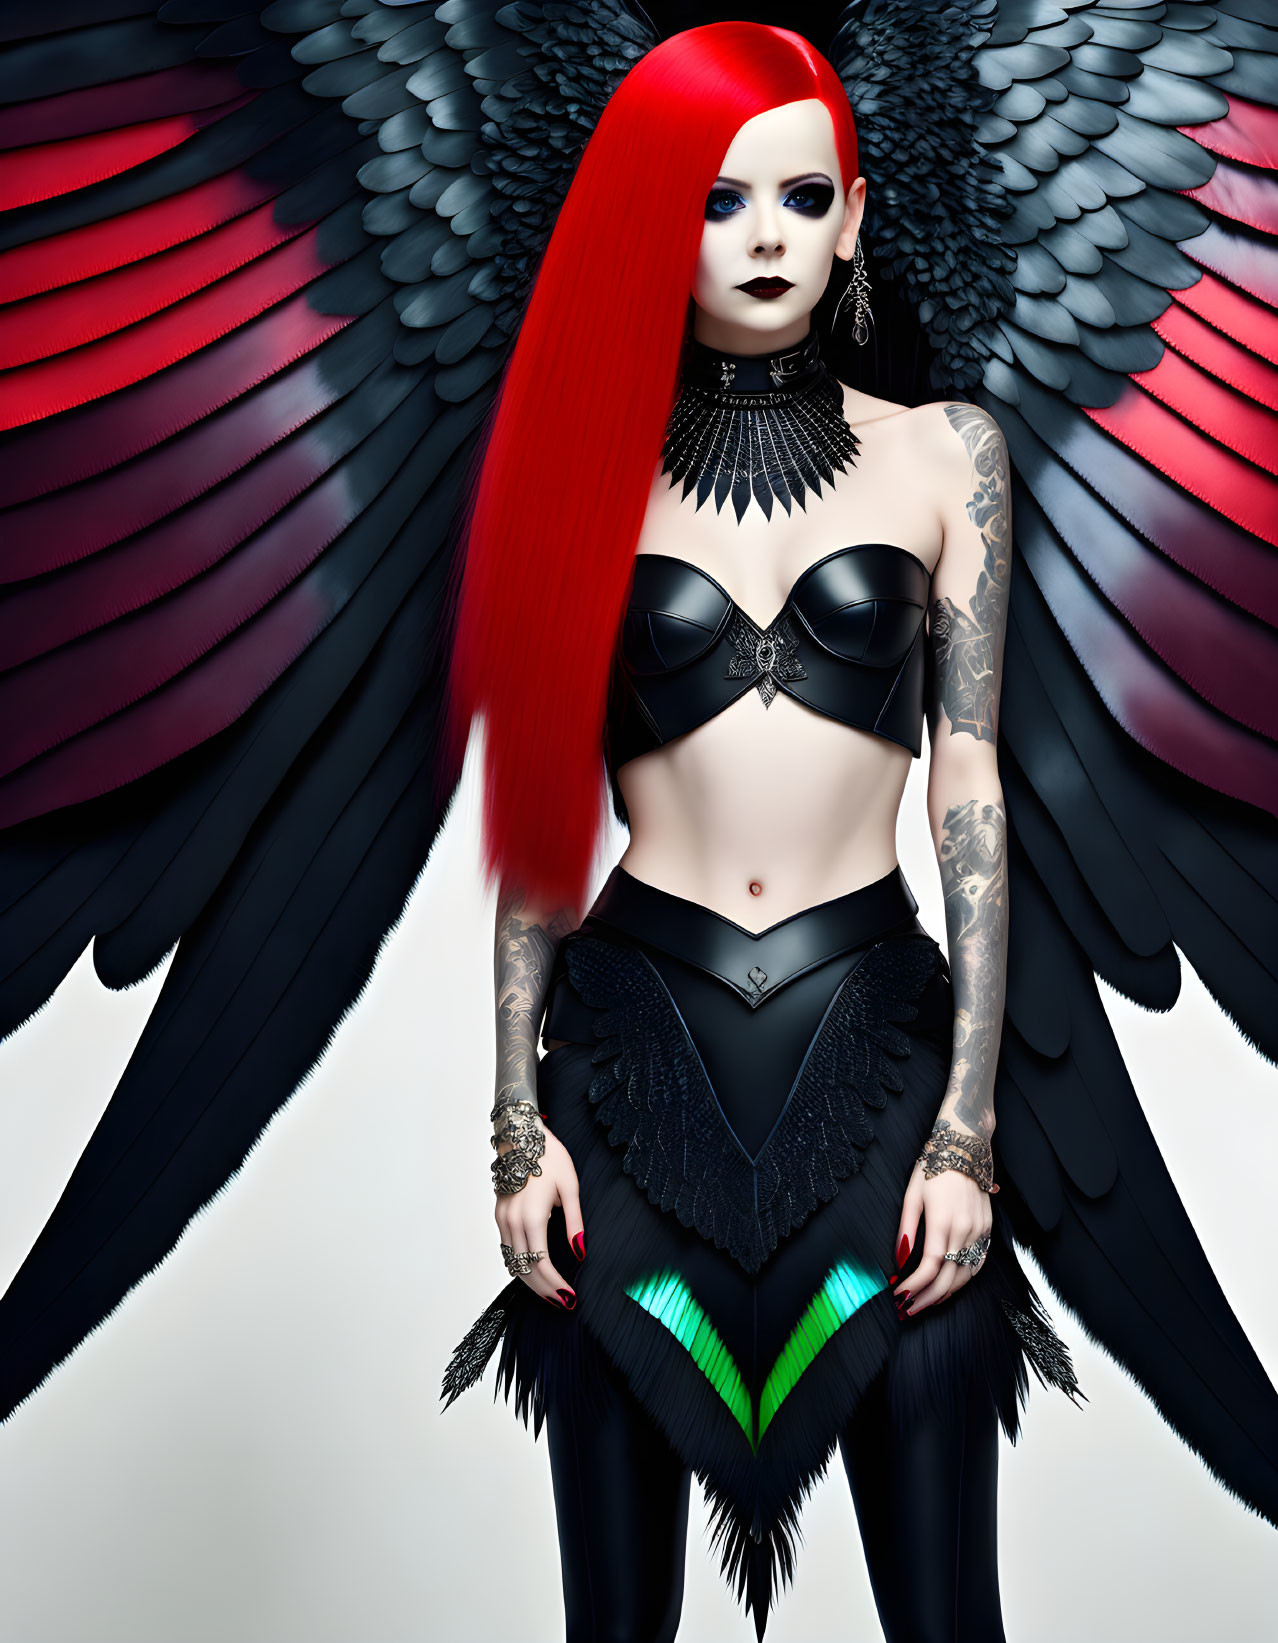 Red-haired woman with black angel wings in 3D illustration